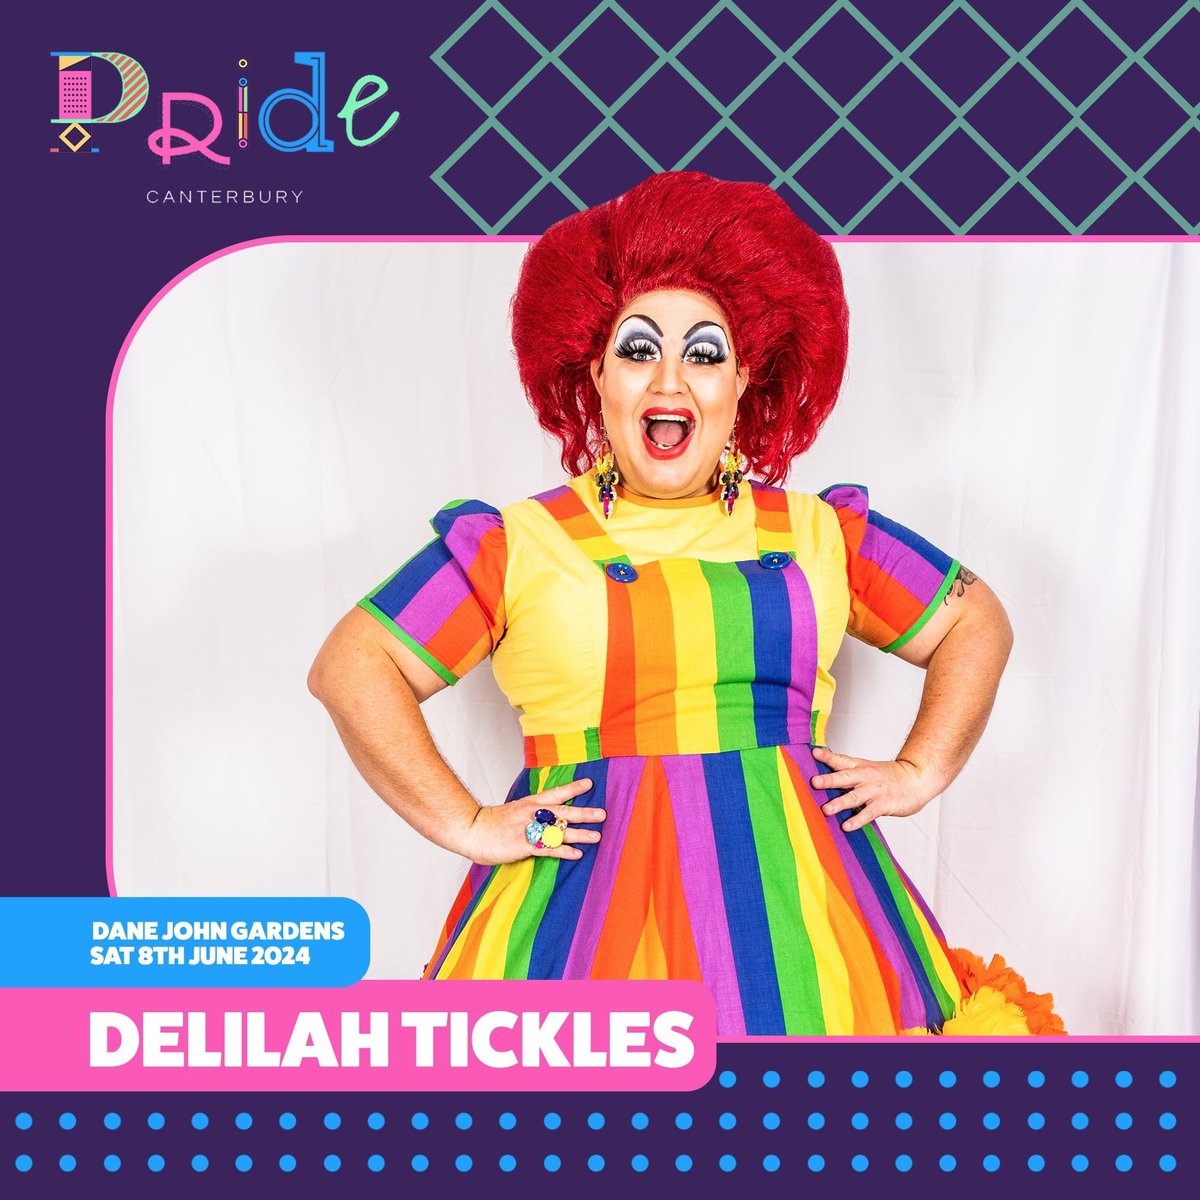 back as your hostess with the mostess 👉 it's the Canterbury diva herself Delilah Tickles 🤩 🥰